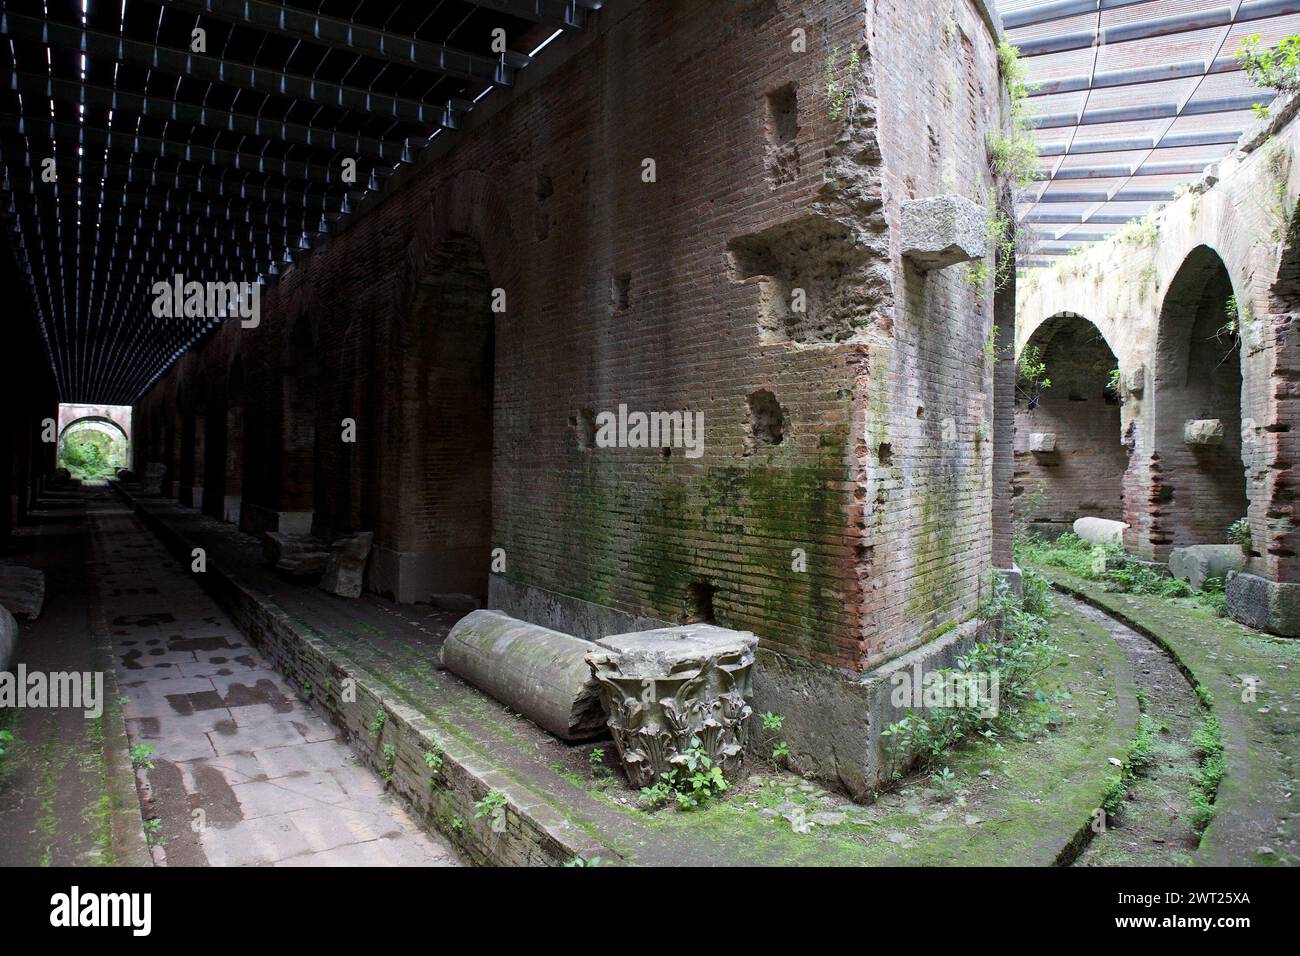 An internal view of the roman amphitheater 'Campano', originally built in the ancient city of Capua, between Rome and Naples Stock Photo